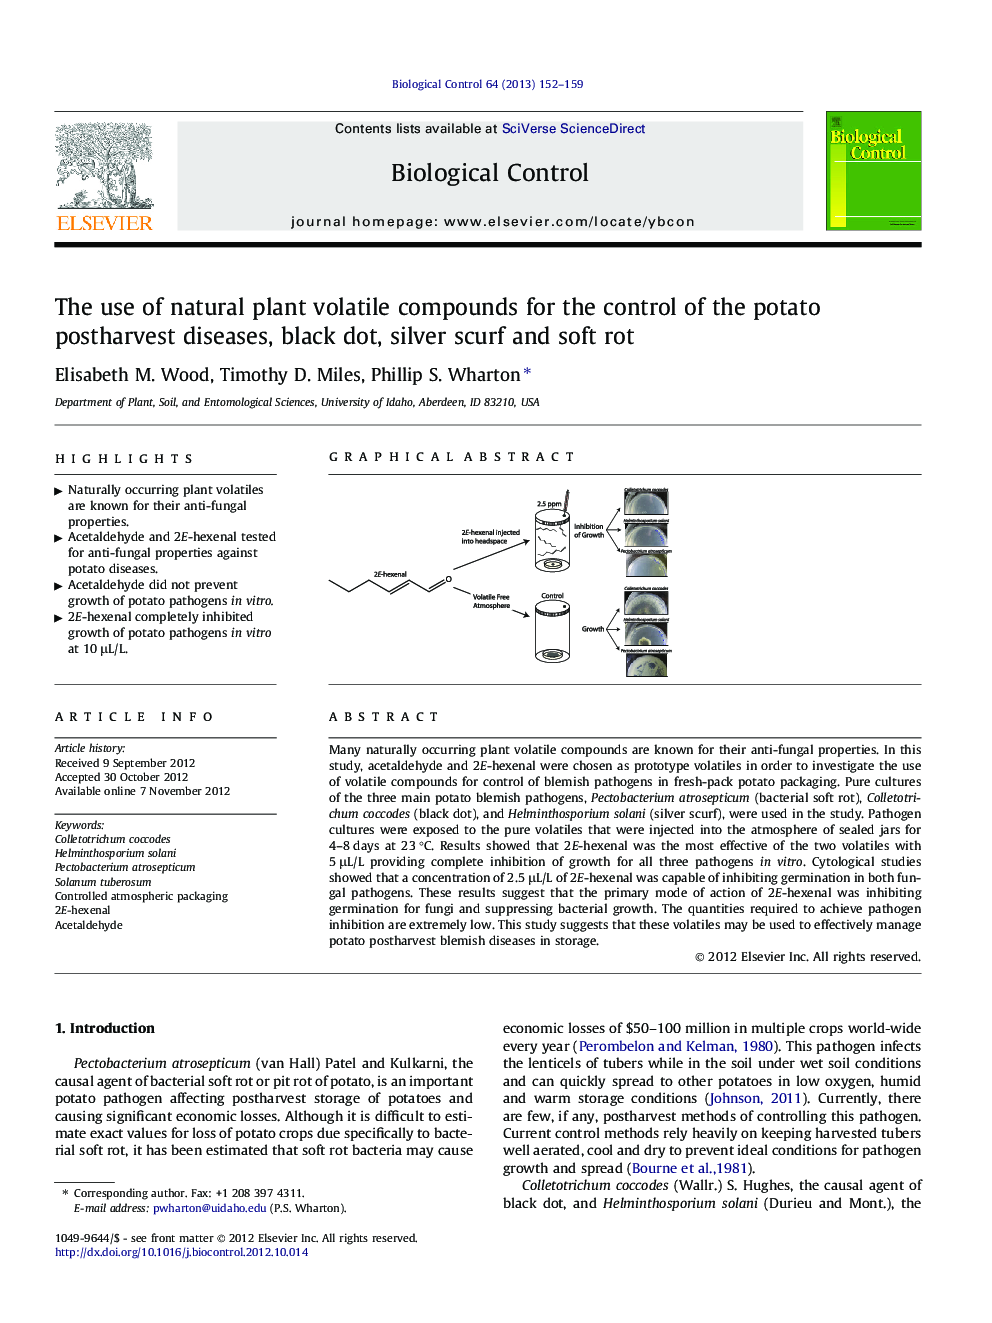 The use of natural plant volatile compounds for the control of the potato postharvest diseases, black dot, silver scurf and soft rot